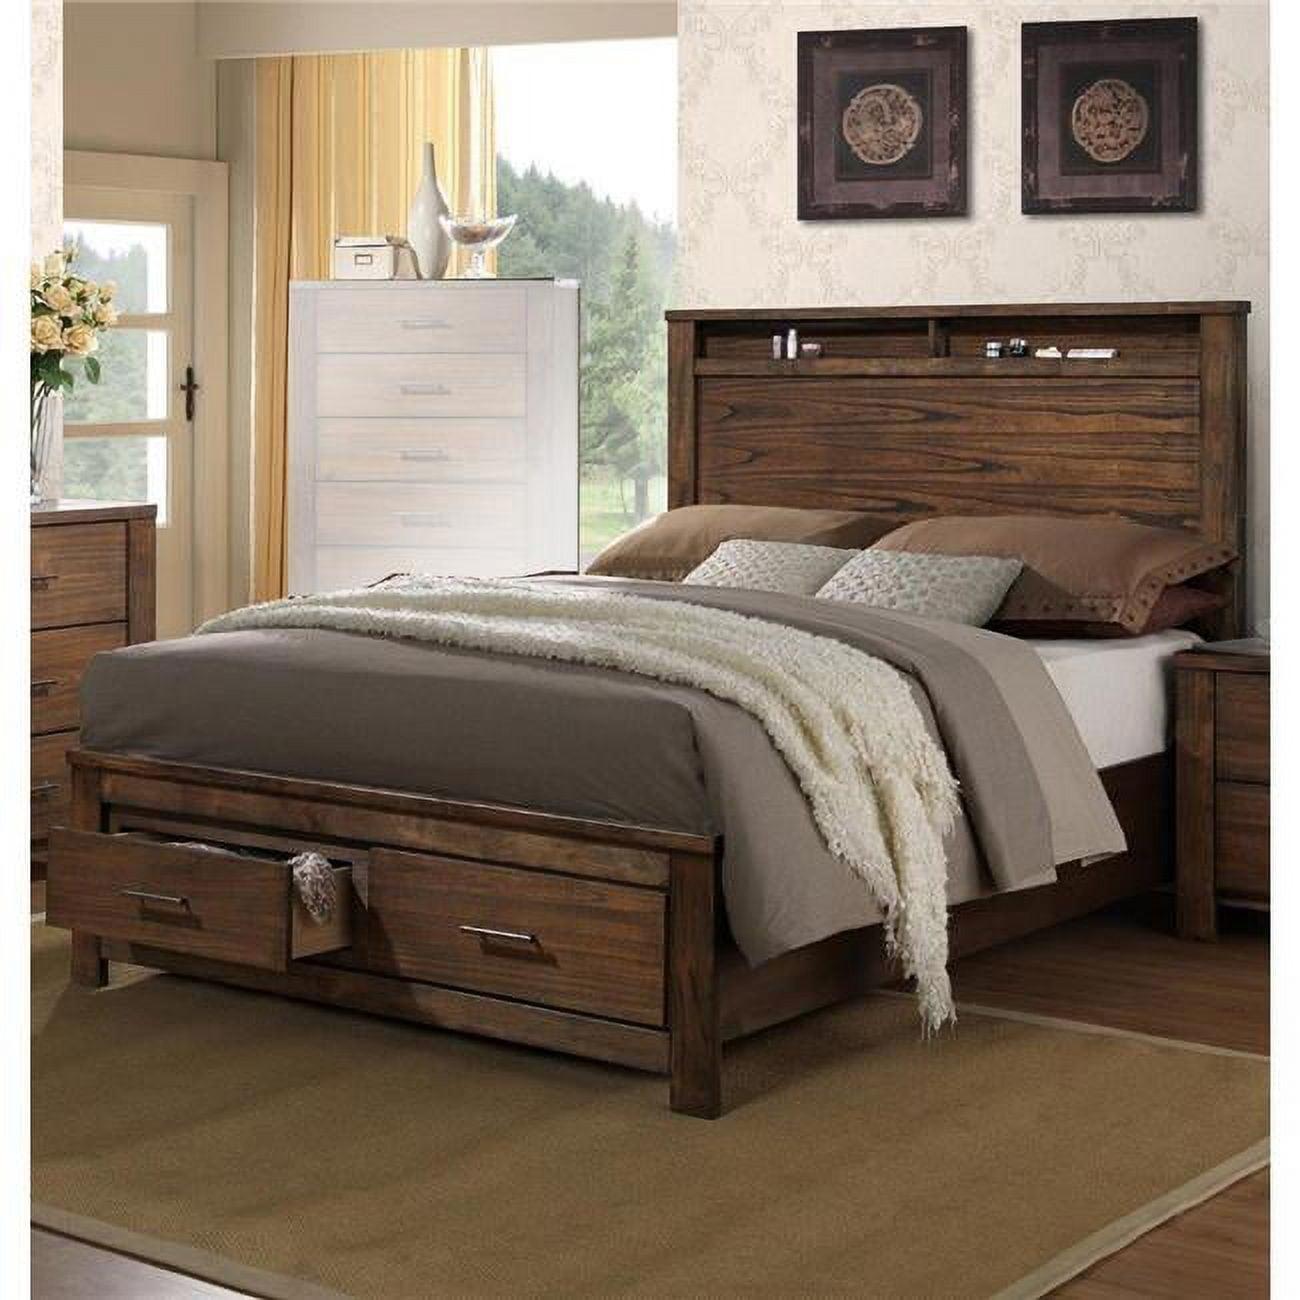 Modern Oak Queen Bed with Storage Drawers and Wood Headboard